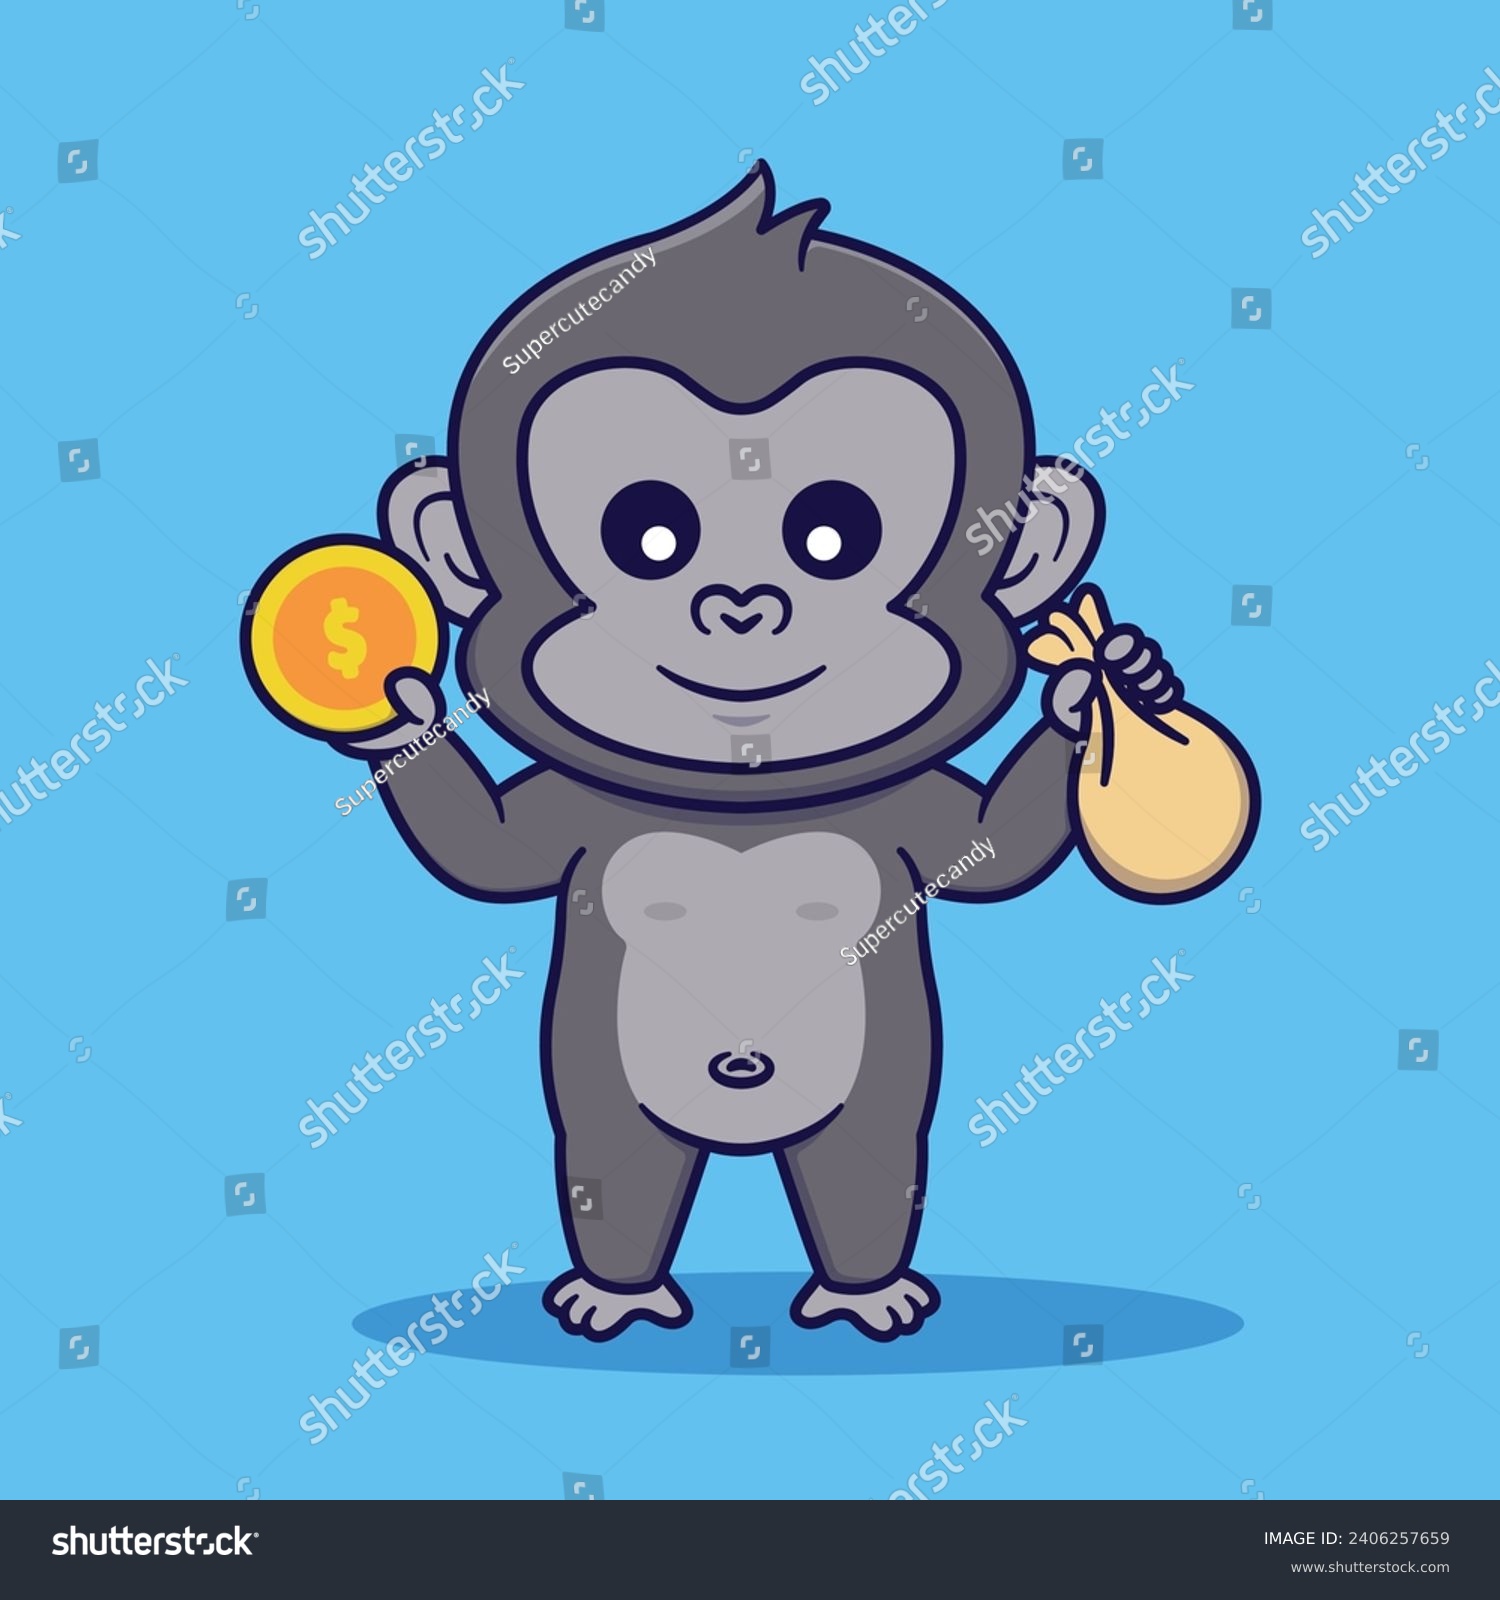 SVG of Cute Gorilla Holding Coin And Bag Vector Illustration svg